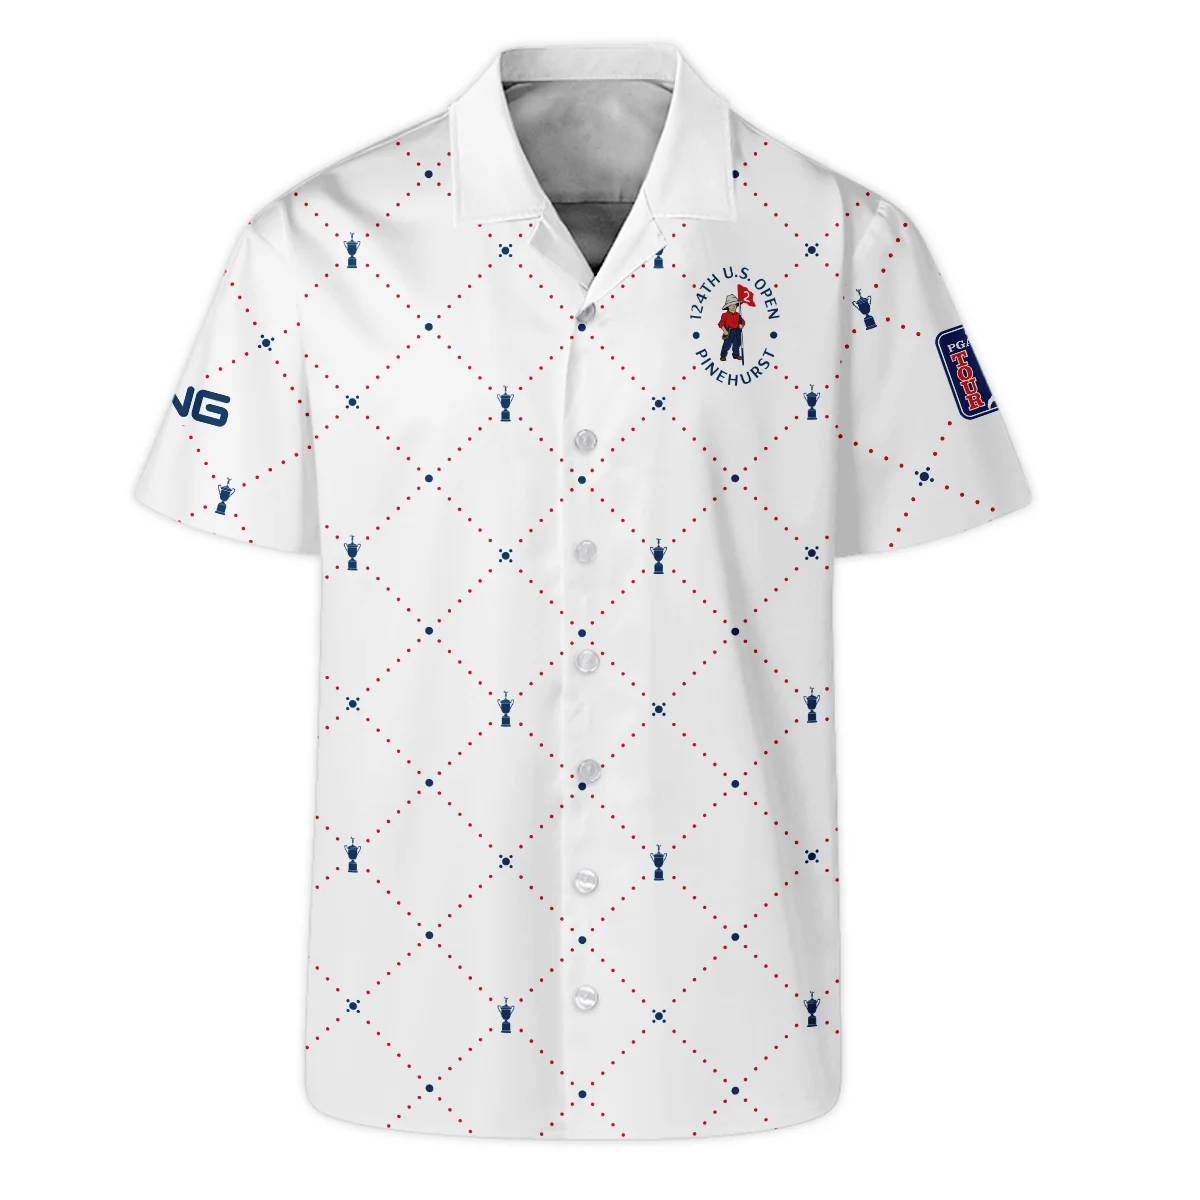 Argyle Pattern With Cup 124th U.S. Open Pinehurst Ping Long Polo Shirt Style Classic Long Polo Shirt For Men